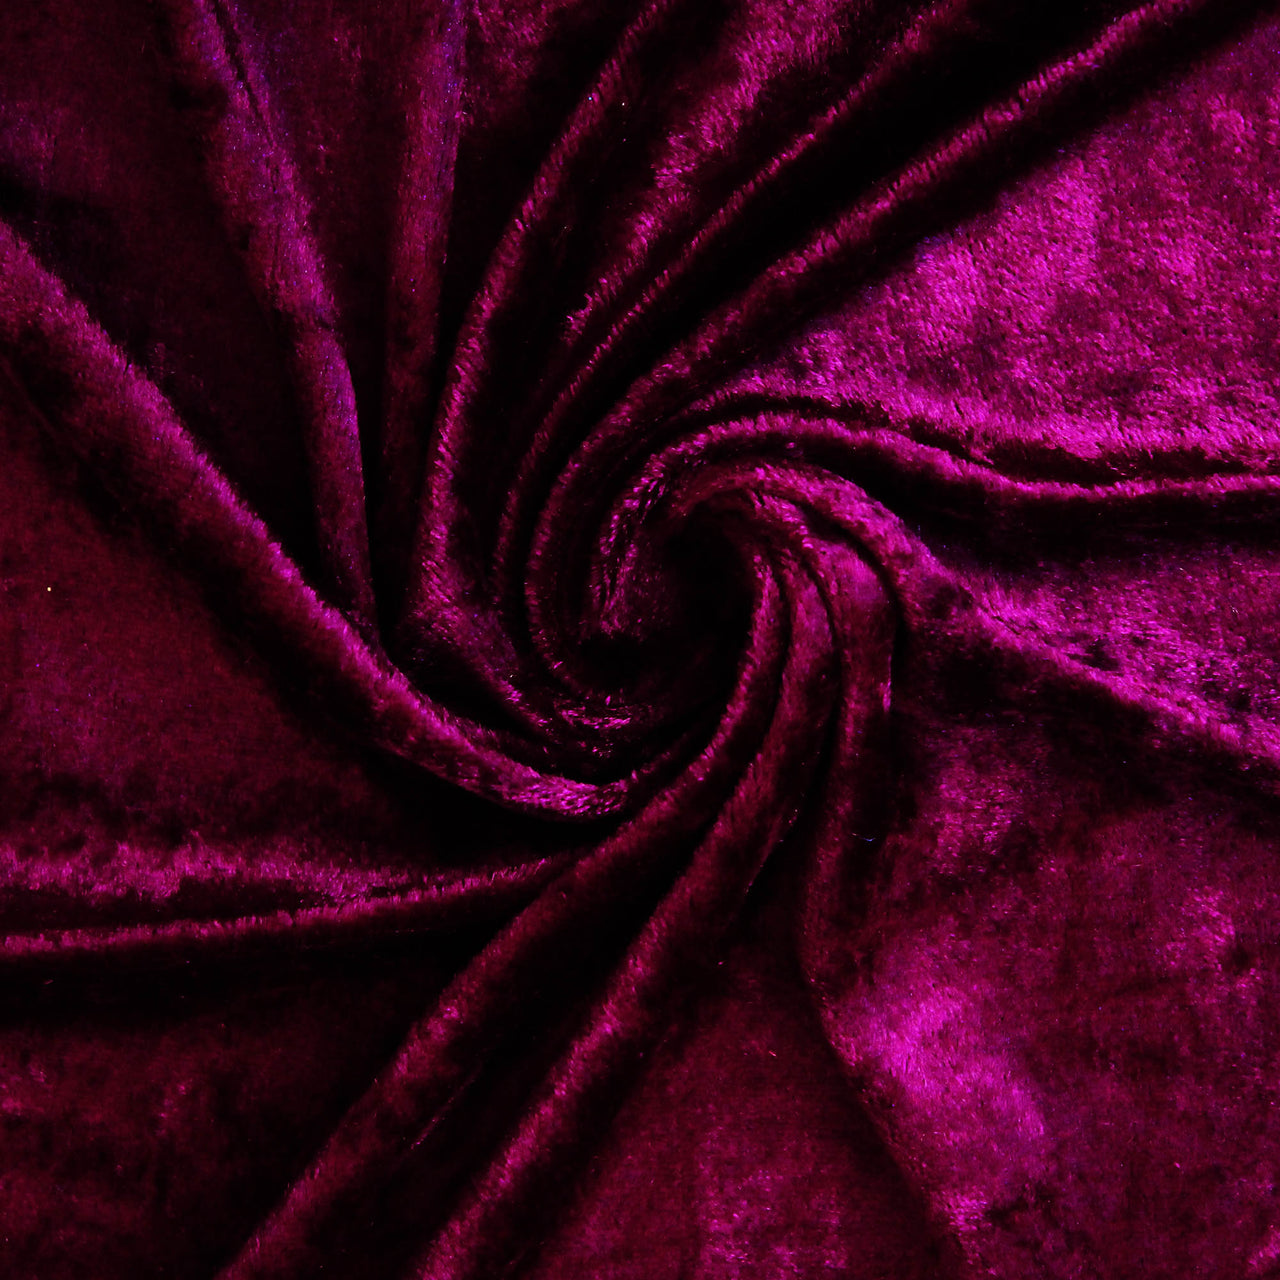 Purple - Crushed Velvet Velour Fabric - Natural One Way Stretch For Costumes & Drapes